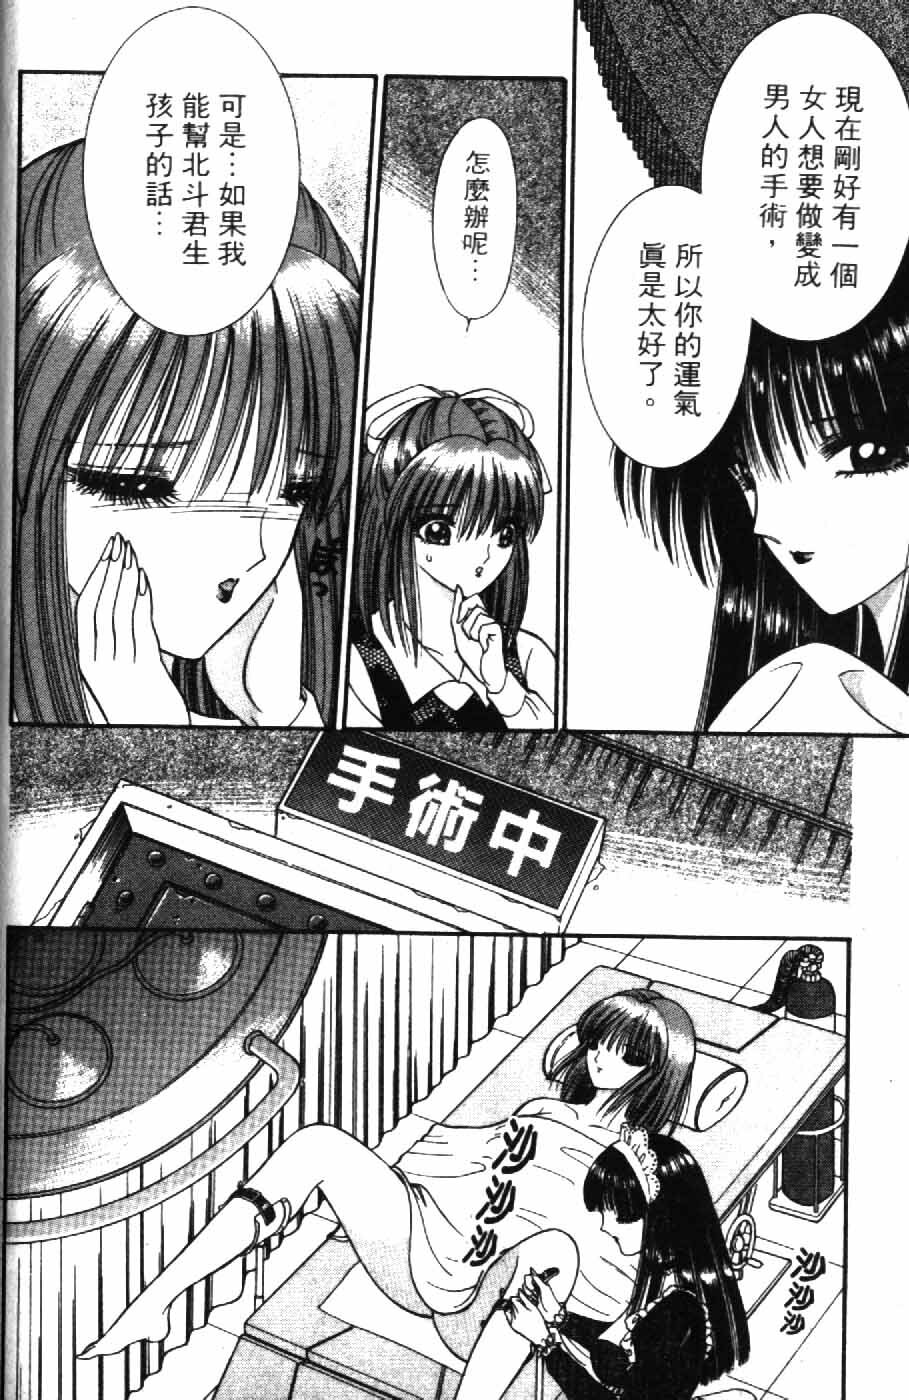 [Senno Knife] Ouma ga Horror Show 2 - Trans Sexual Special Show 2 | 顫慄博覽會 2 [Chinese] page 34 full